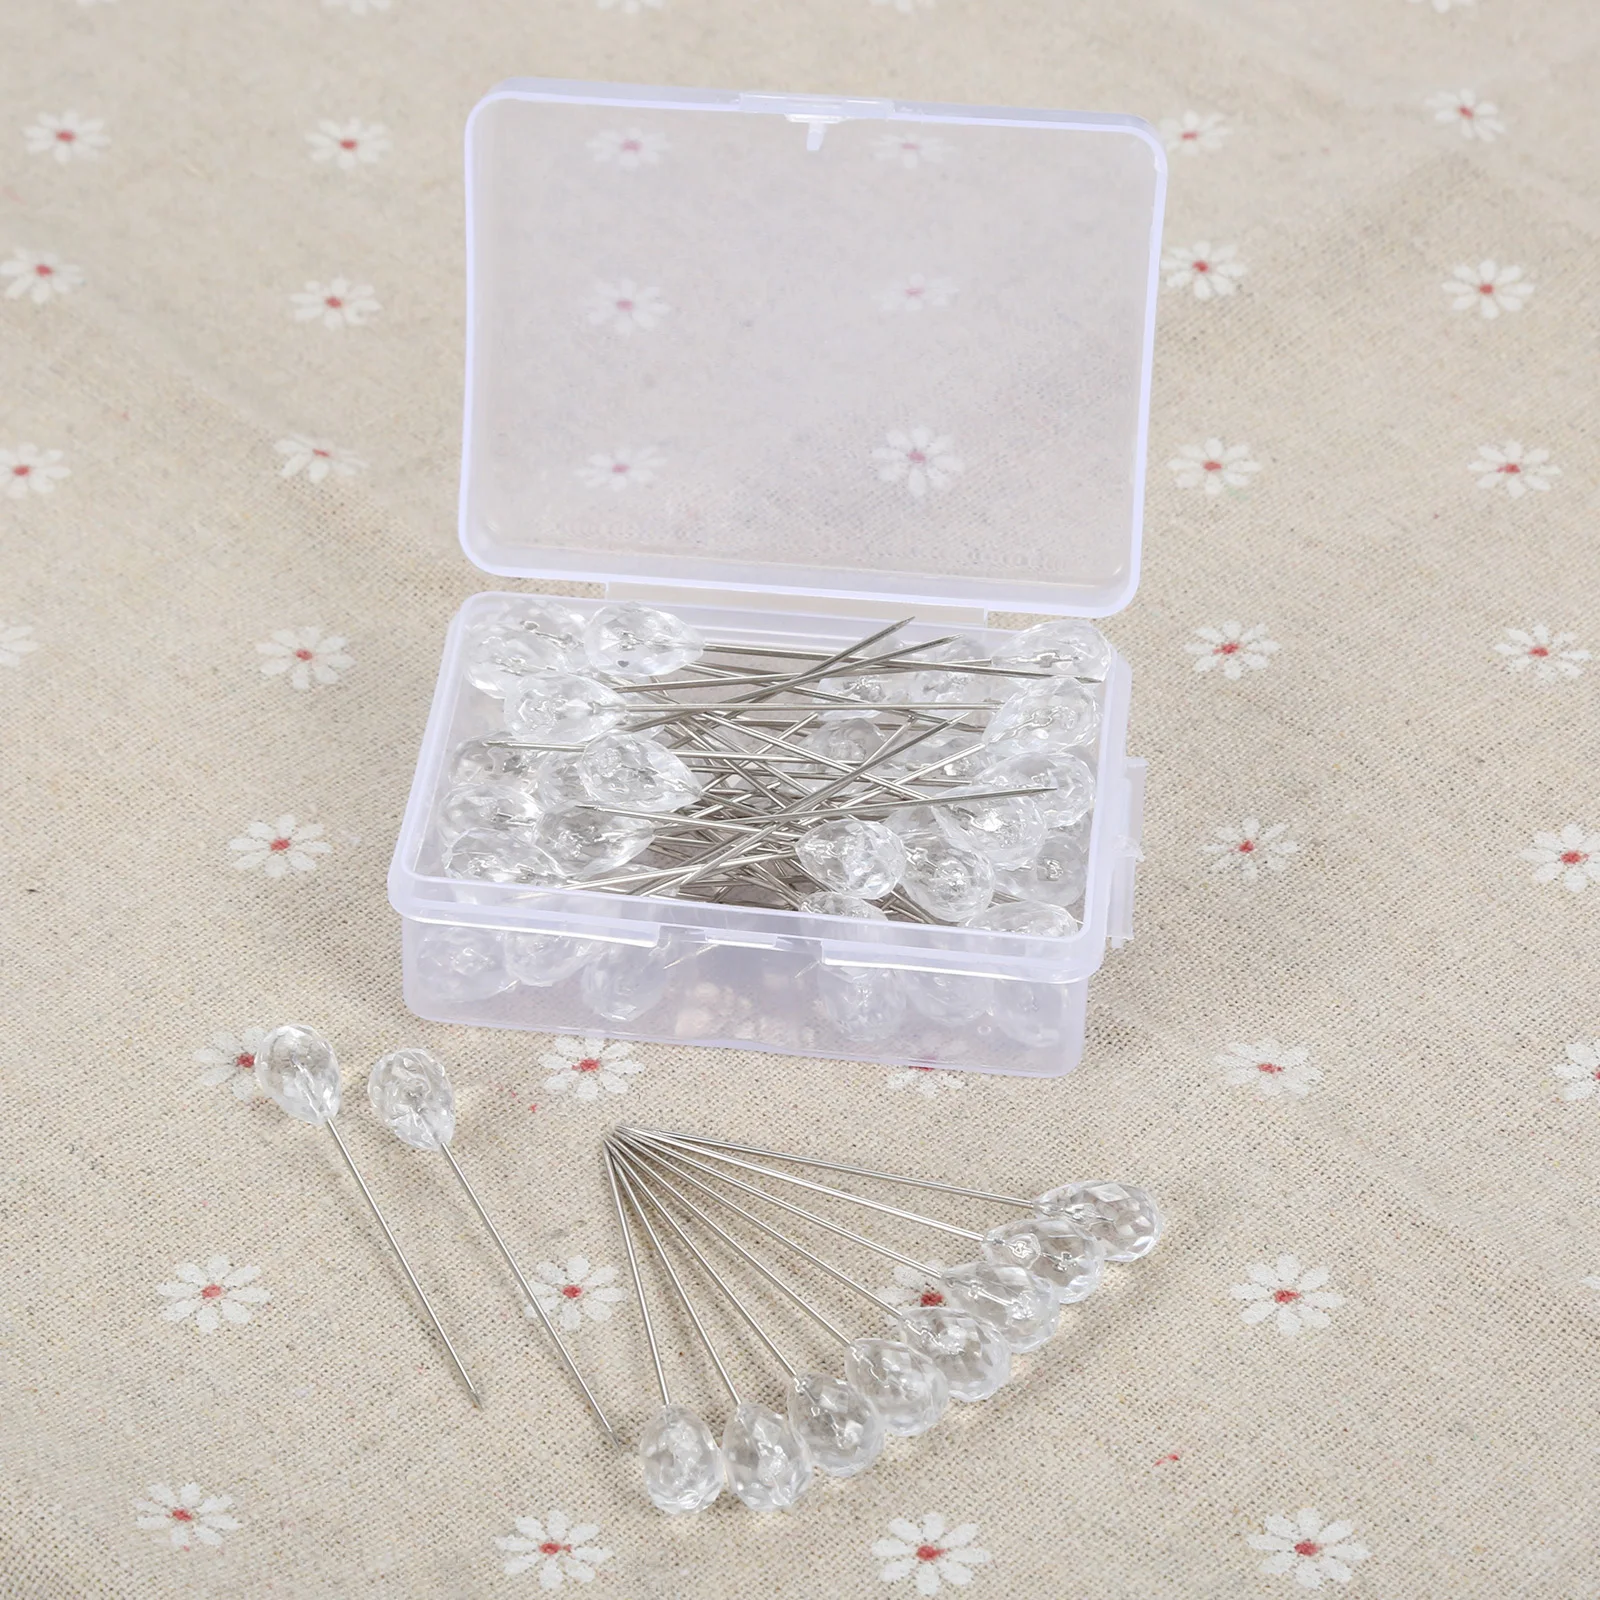 50Pcs Clear Diamond Sewing Garment Straight Pins Wedding Corsage Boutonniere Floral Bouquet Fixed Pin Thumbtack with Plastic Box images - 6